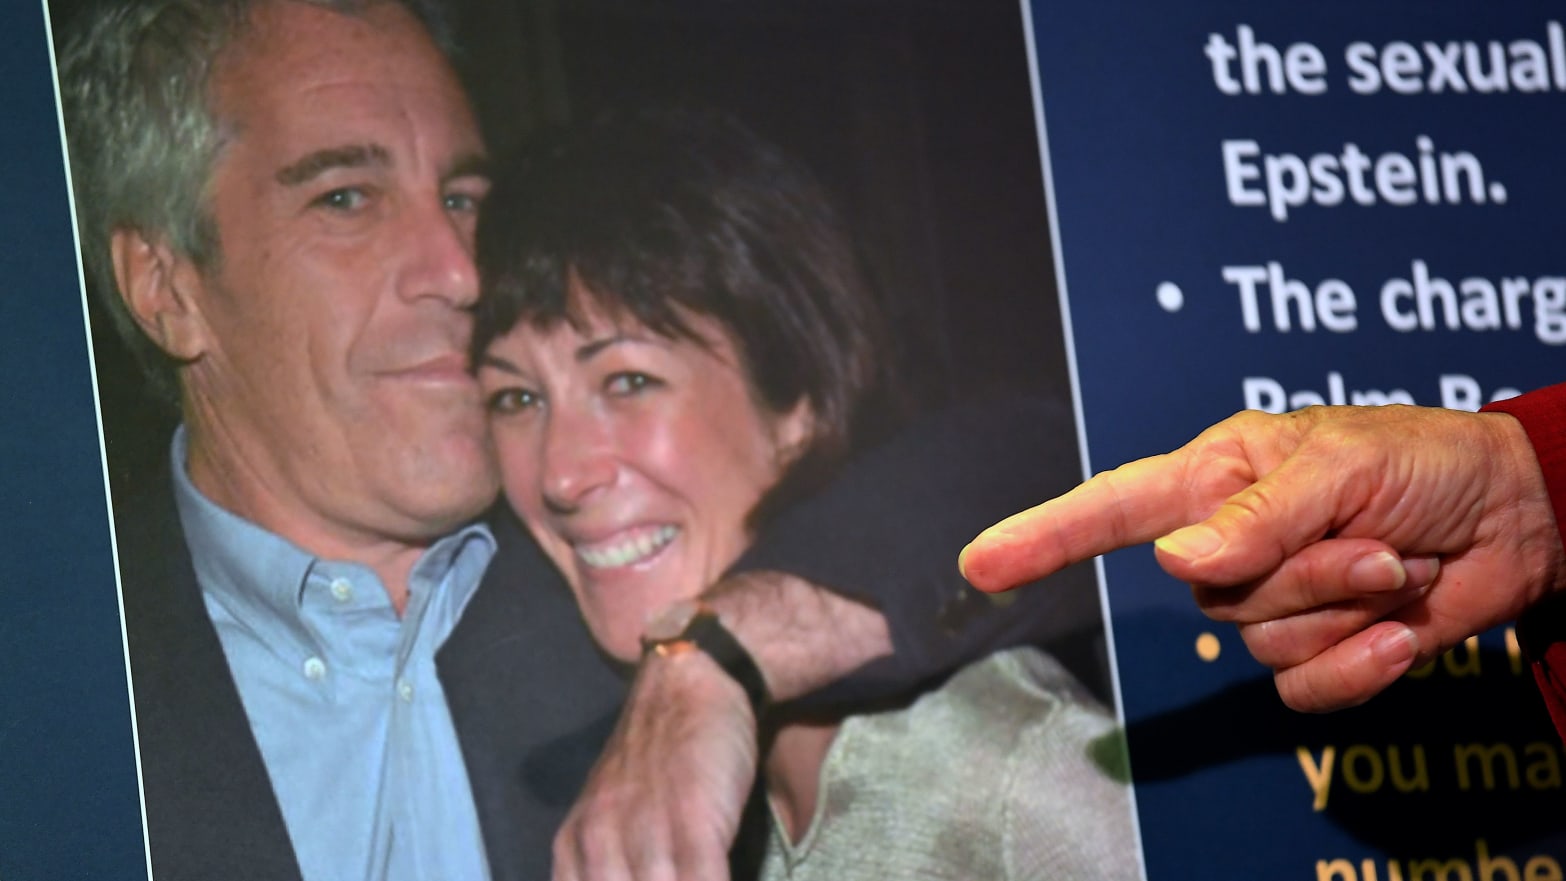 Jeffrey Epstein and Ghislaine Maxwell Forced Young Girls Into an Orgy, Court Records image